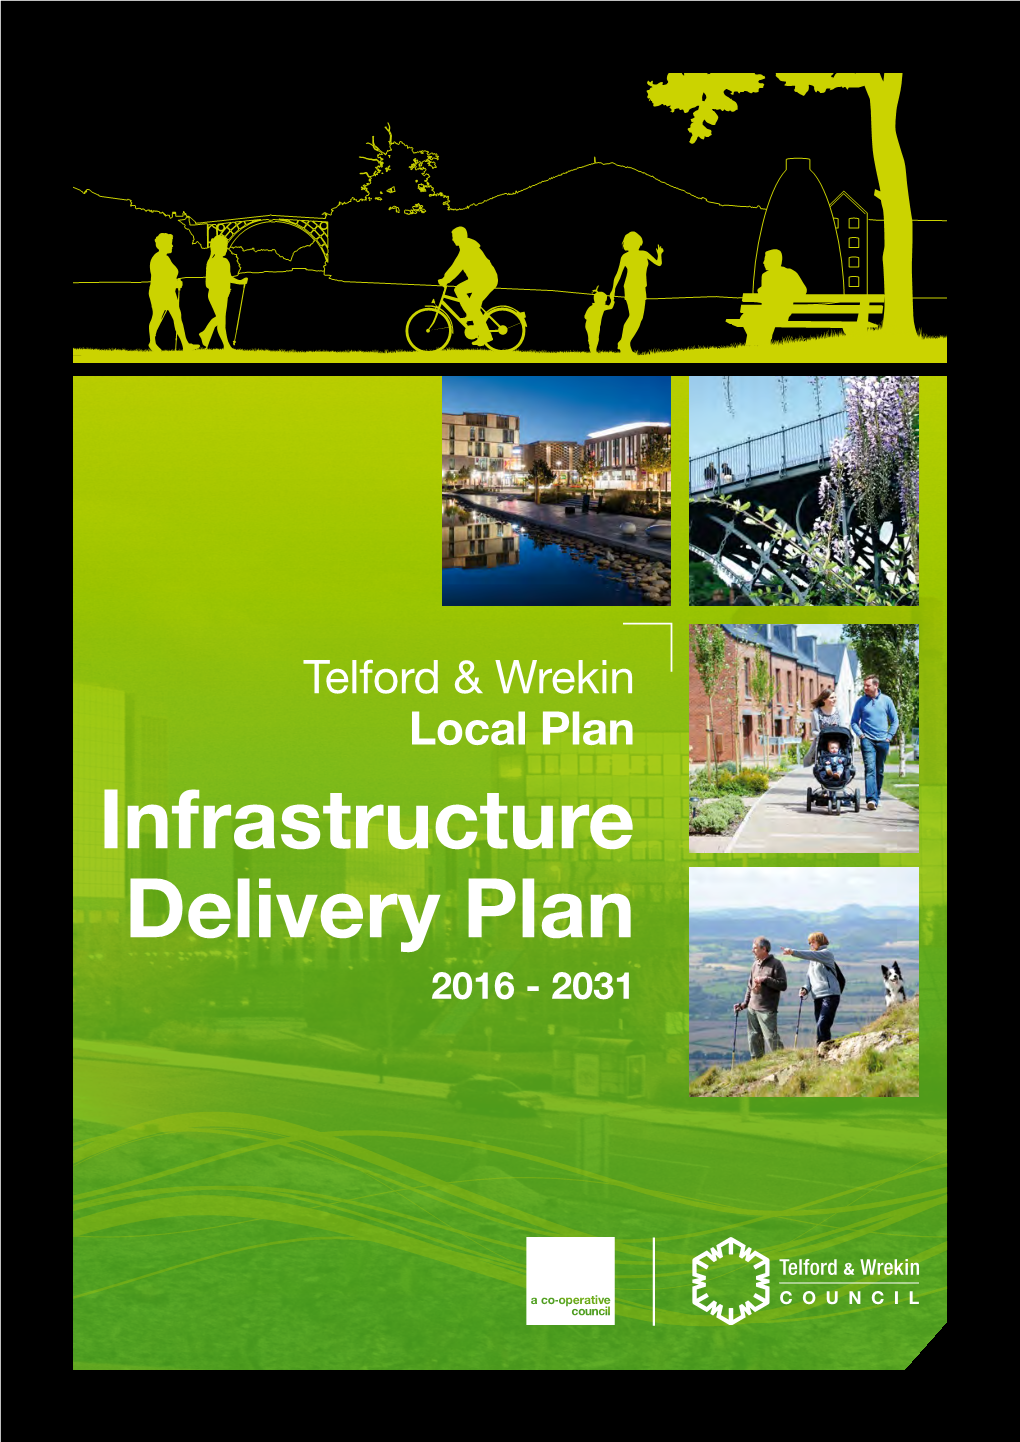 Infrastructure Delivery Plan 2016 - 2031